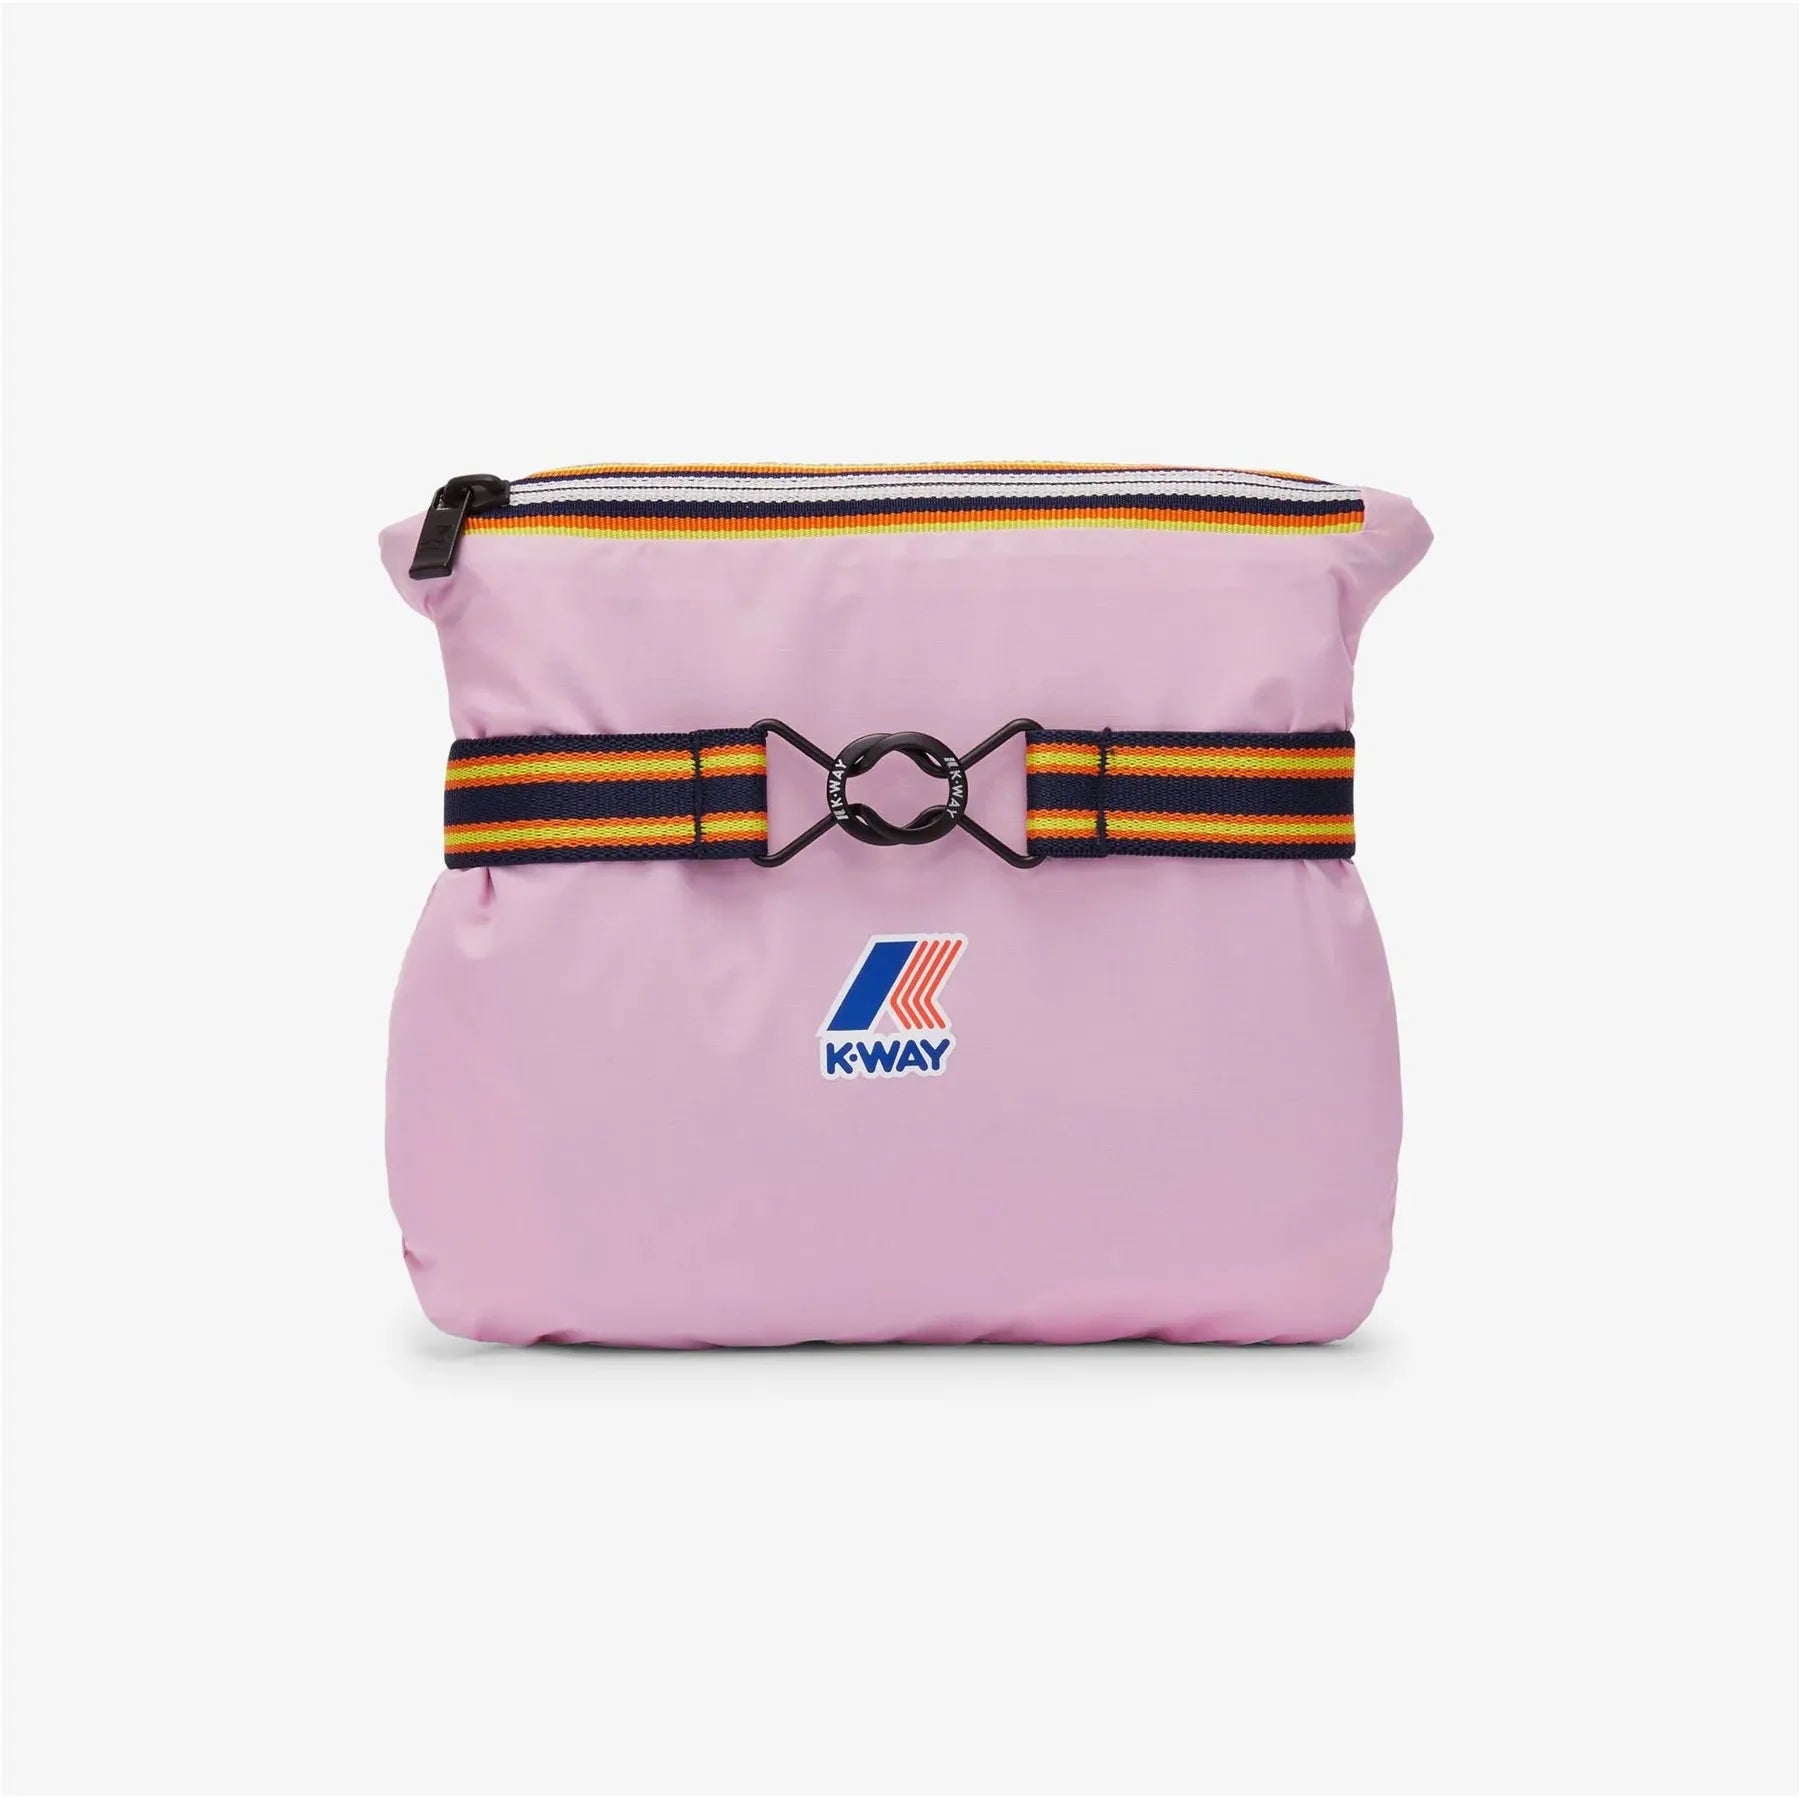 Pink K-Way Le Vrai 3.0 Claude waterproof crossbody pouch with a front strap featuring a metal clip and multicolor striped accents, set against a white background.